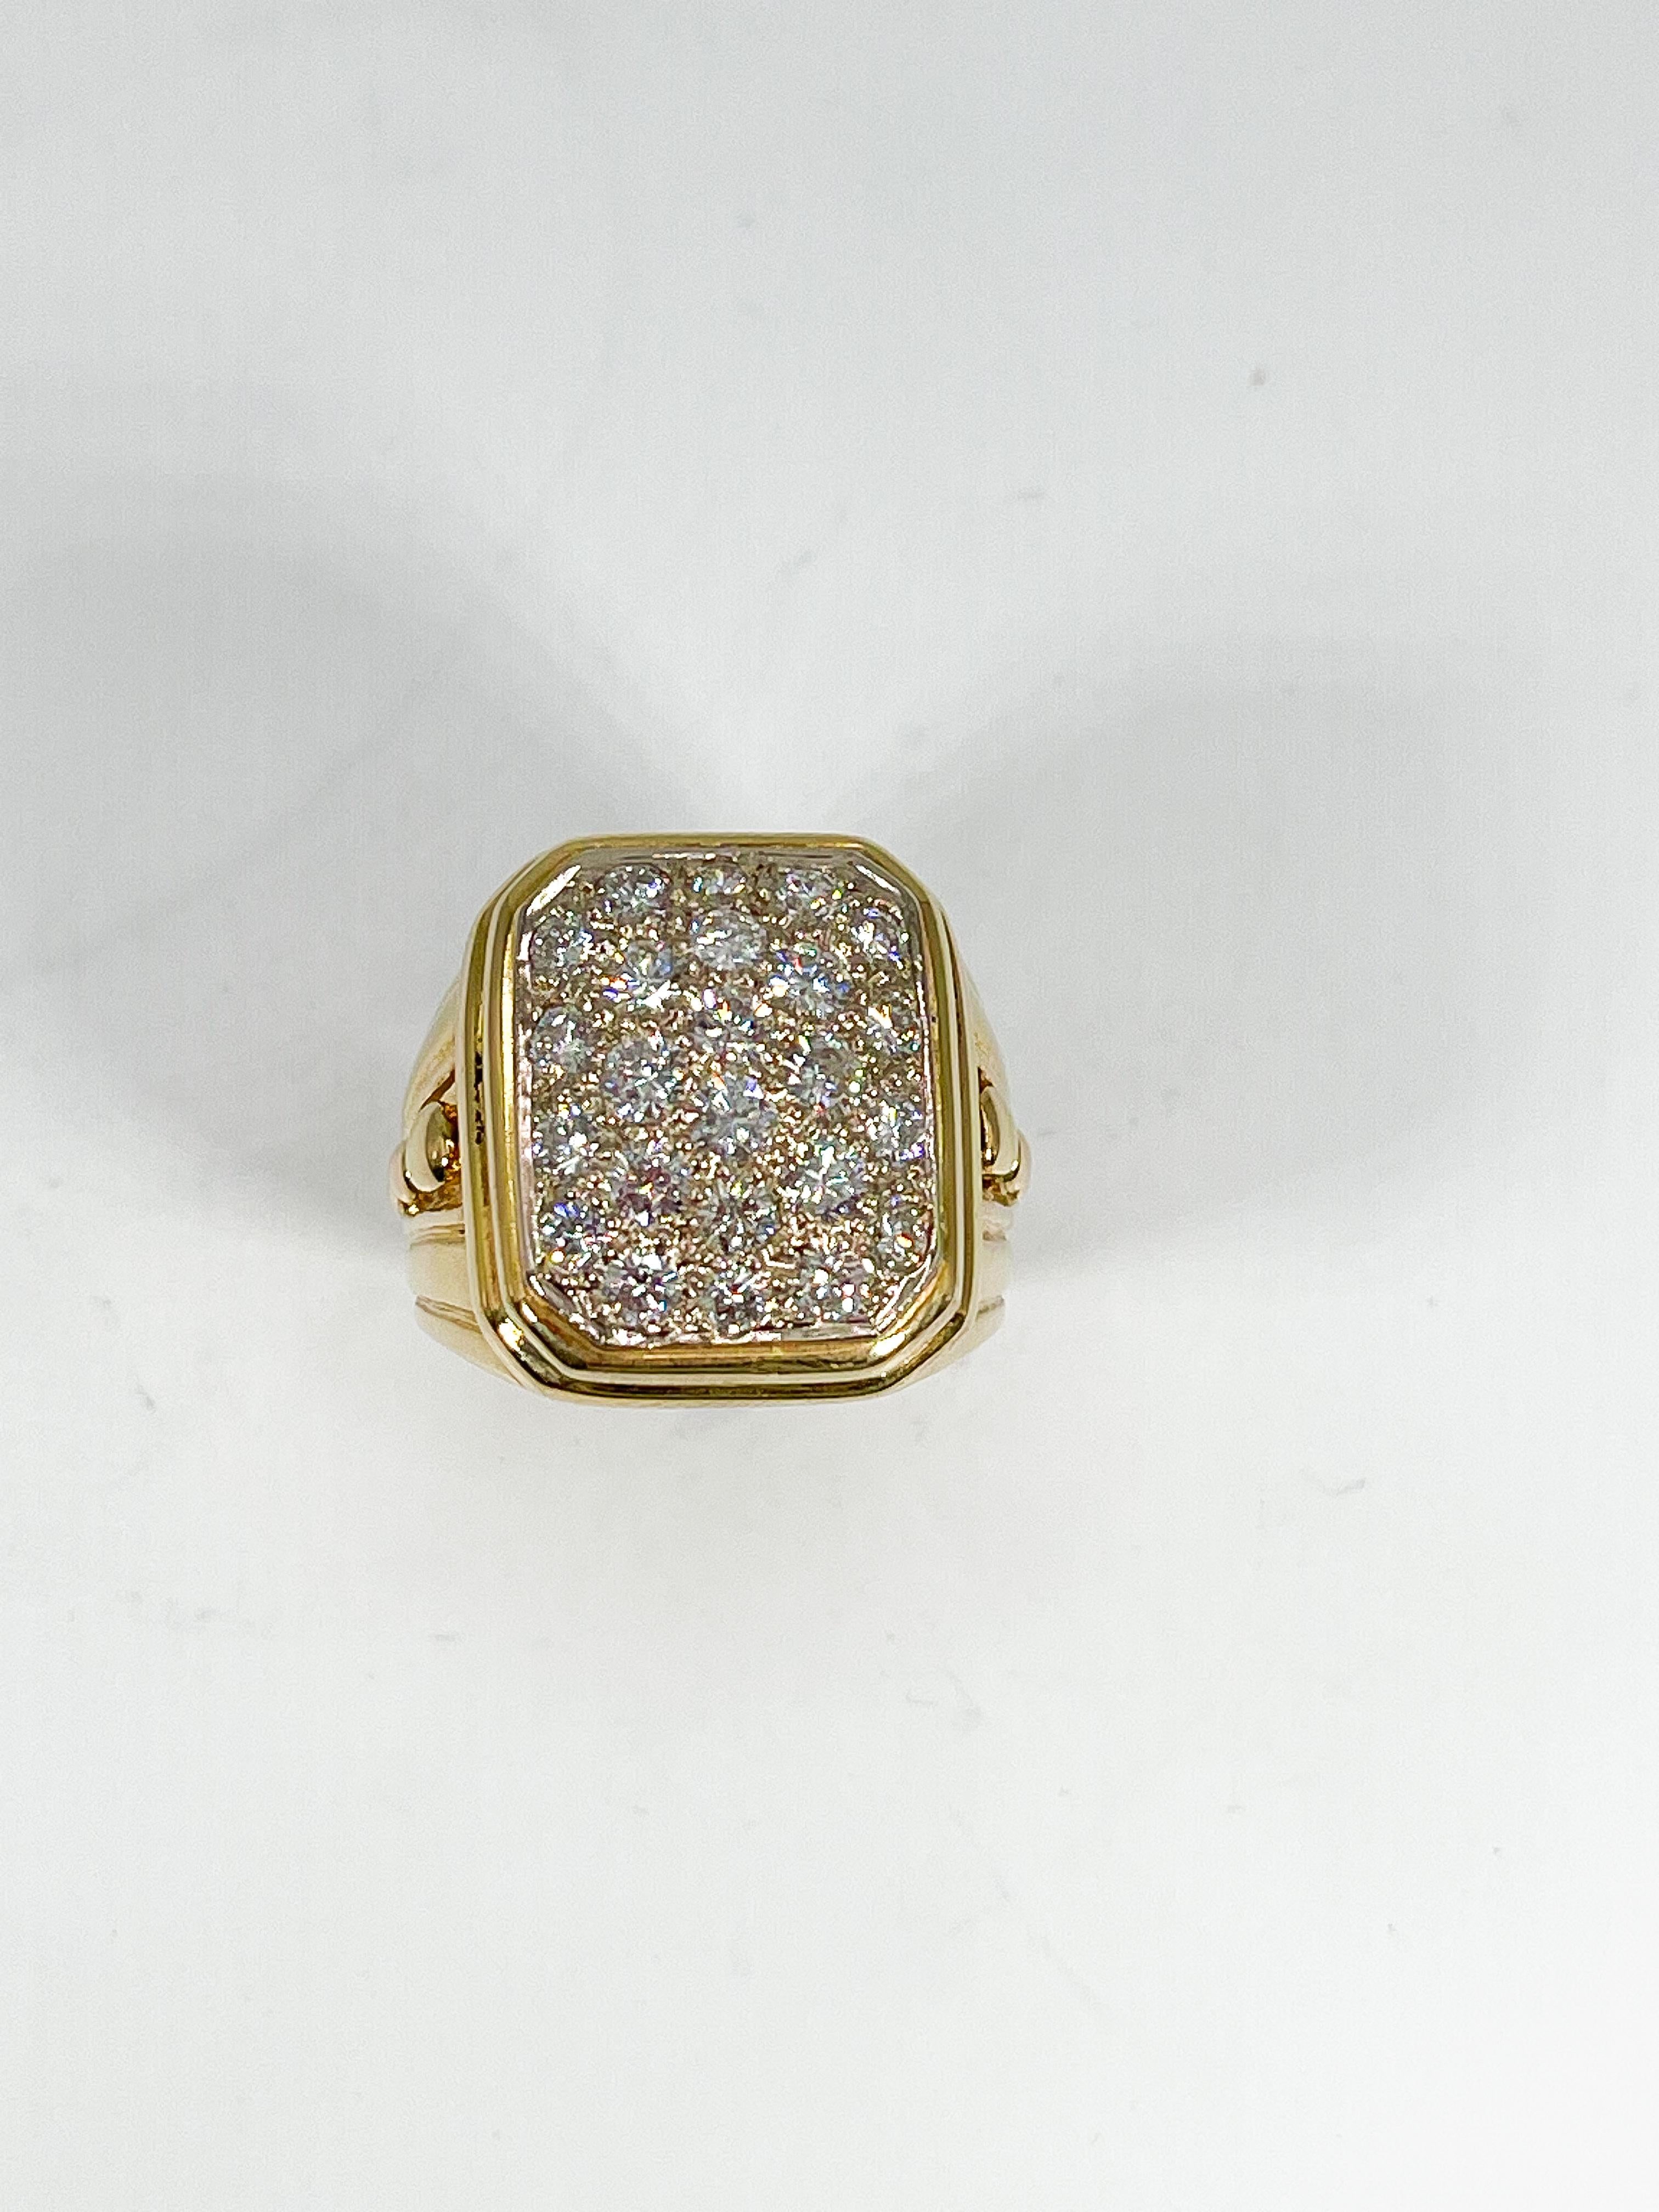 14k yellow gold mens 1 CTW diamond fashion ring. This mens ring has 24 diamonds on the face and detailing along the side of the ring. Measures a size 7 1/4 and has a weight of 17.09 grams